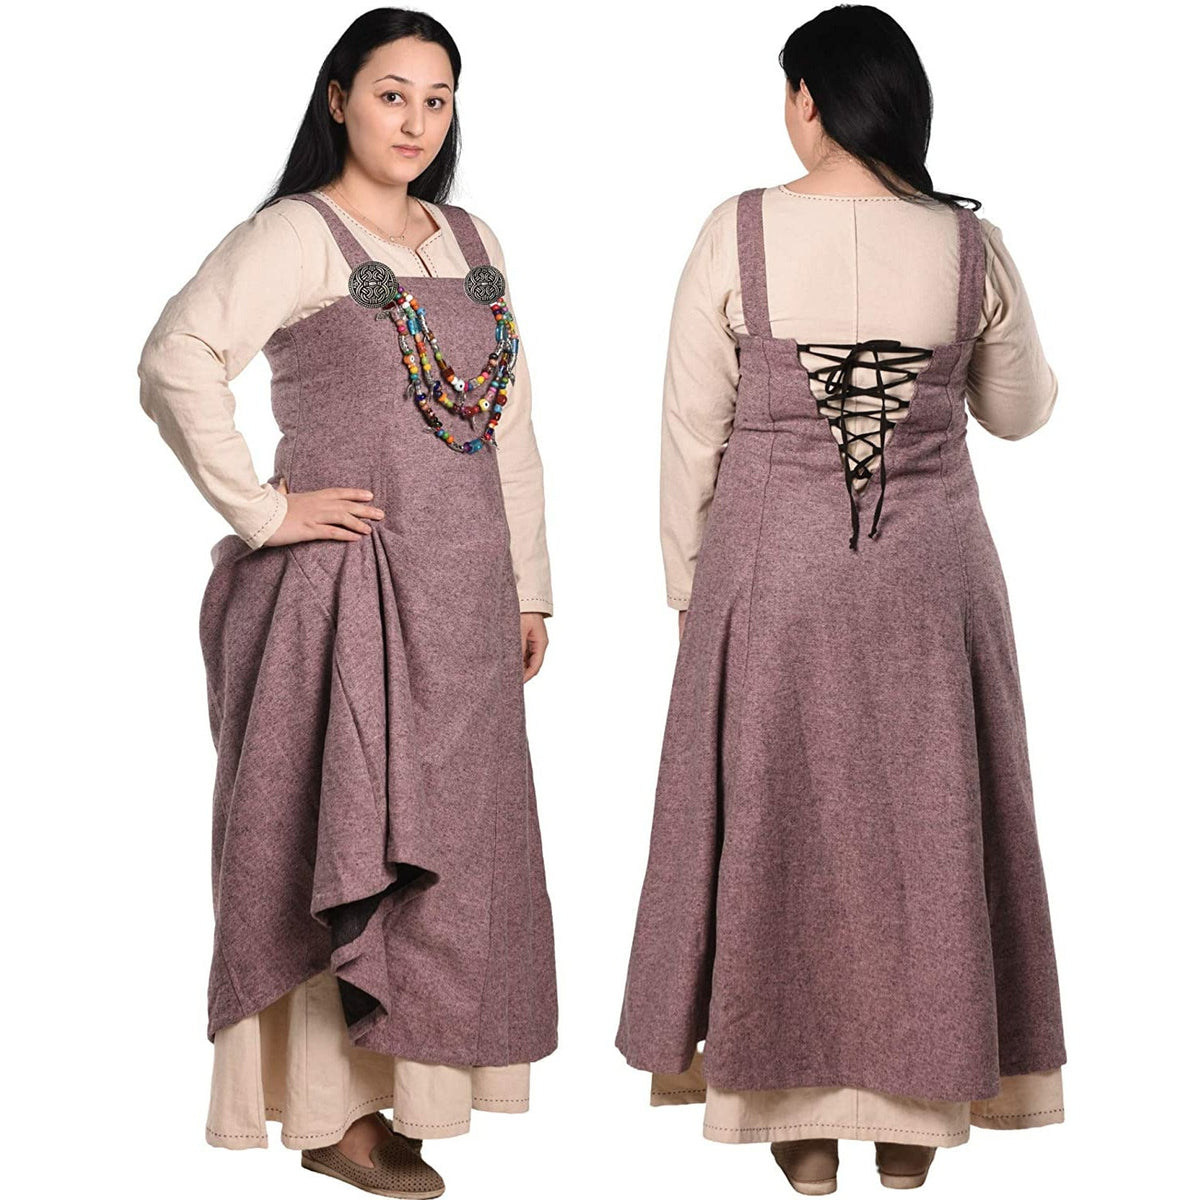 Helga Viking Apron Dress in Wool with Back Laces 